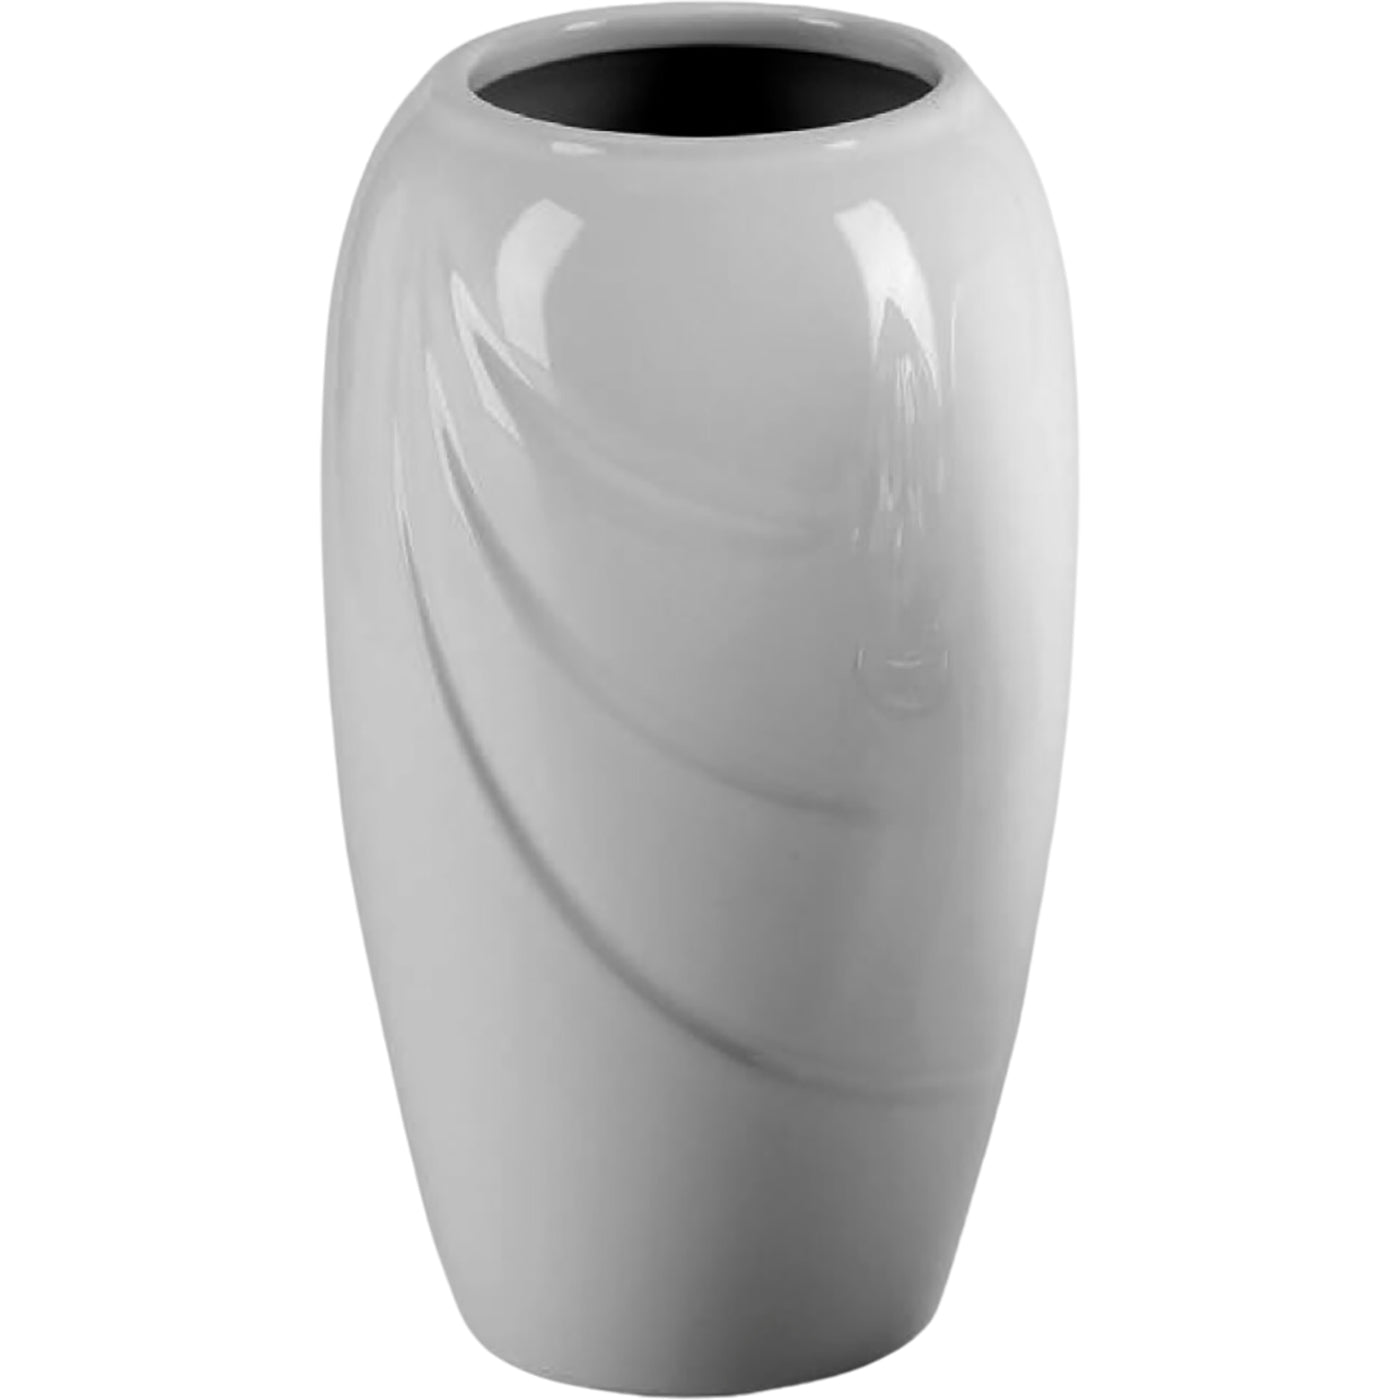 Grave vase Ecotre 21x13cm - 8.3x5.1in In white porcelain, wall attached ECO150P